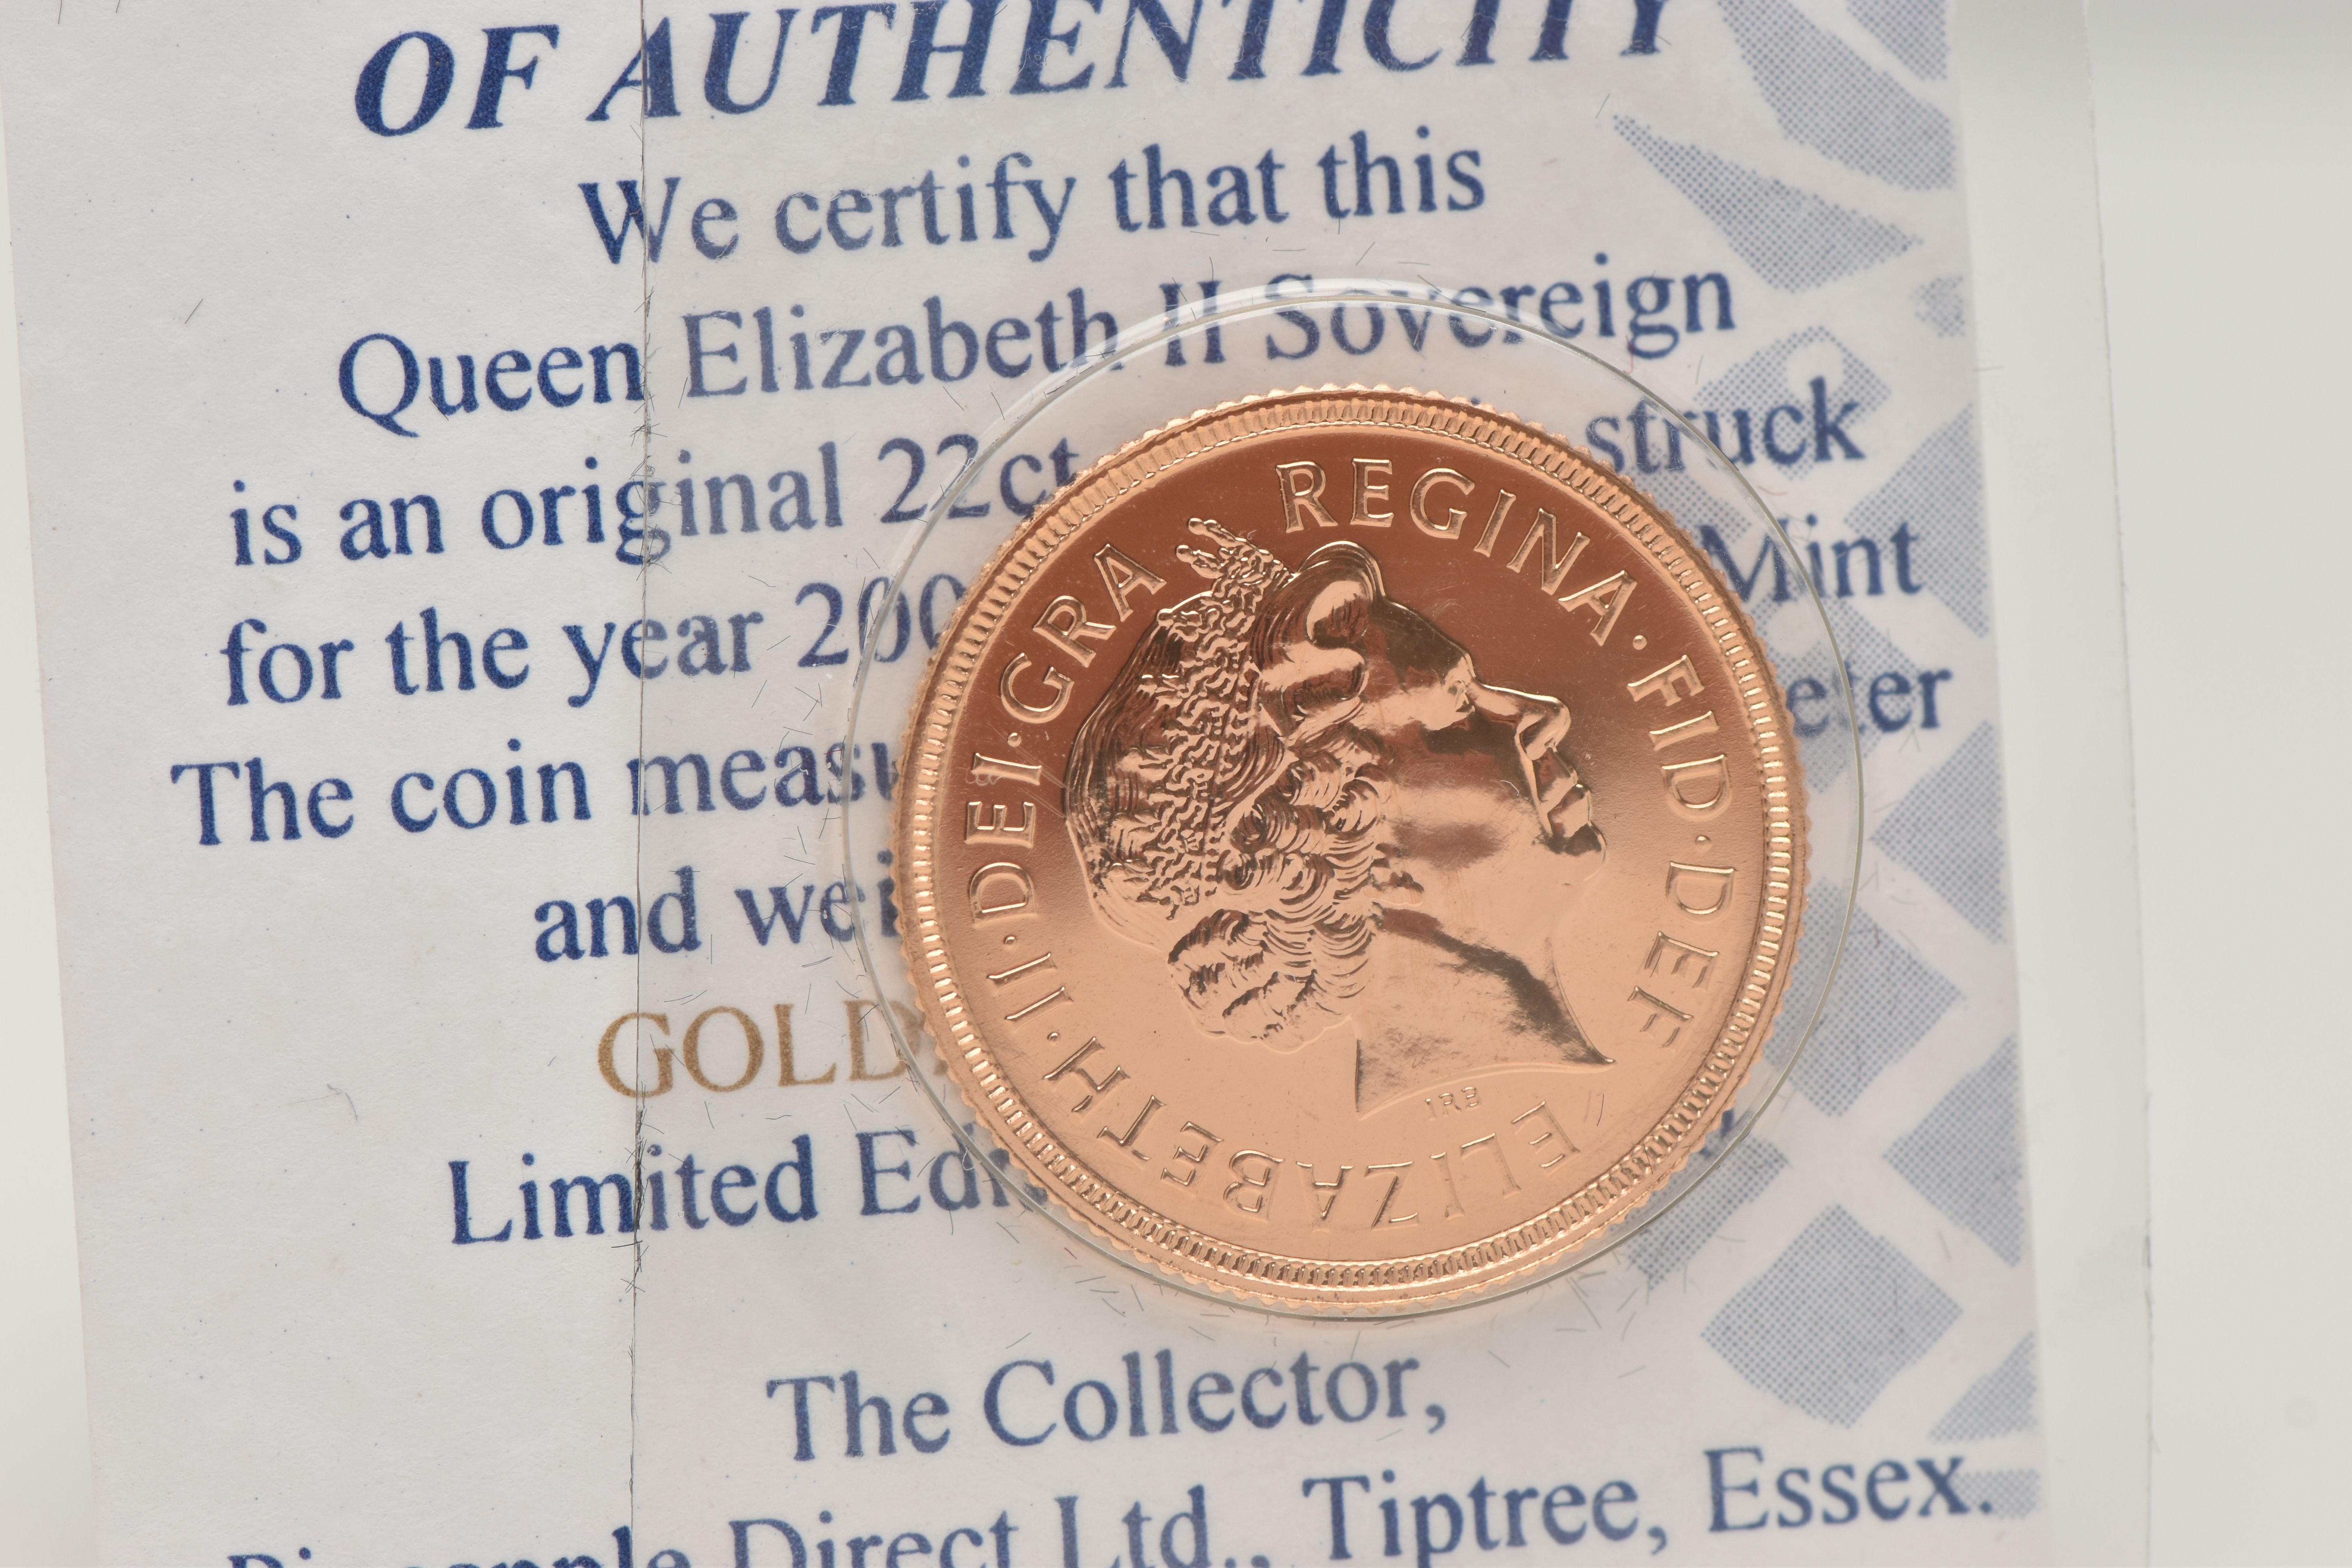 A TIMOTHY NOAD JUBILEE SHIELD 2002 22CT FULL GOLD SOVEREIGN COIN, 75,264 mintage, Elizabeth II, 7.98 - Image 2 of 2